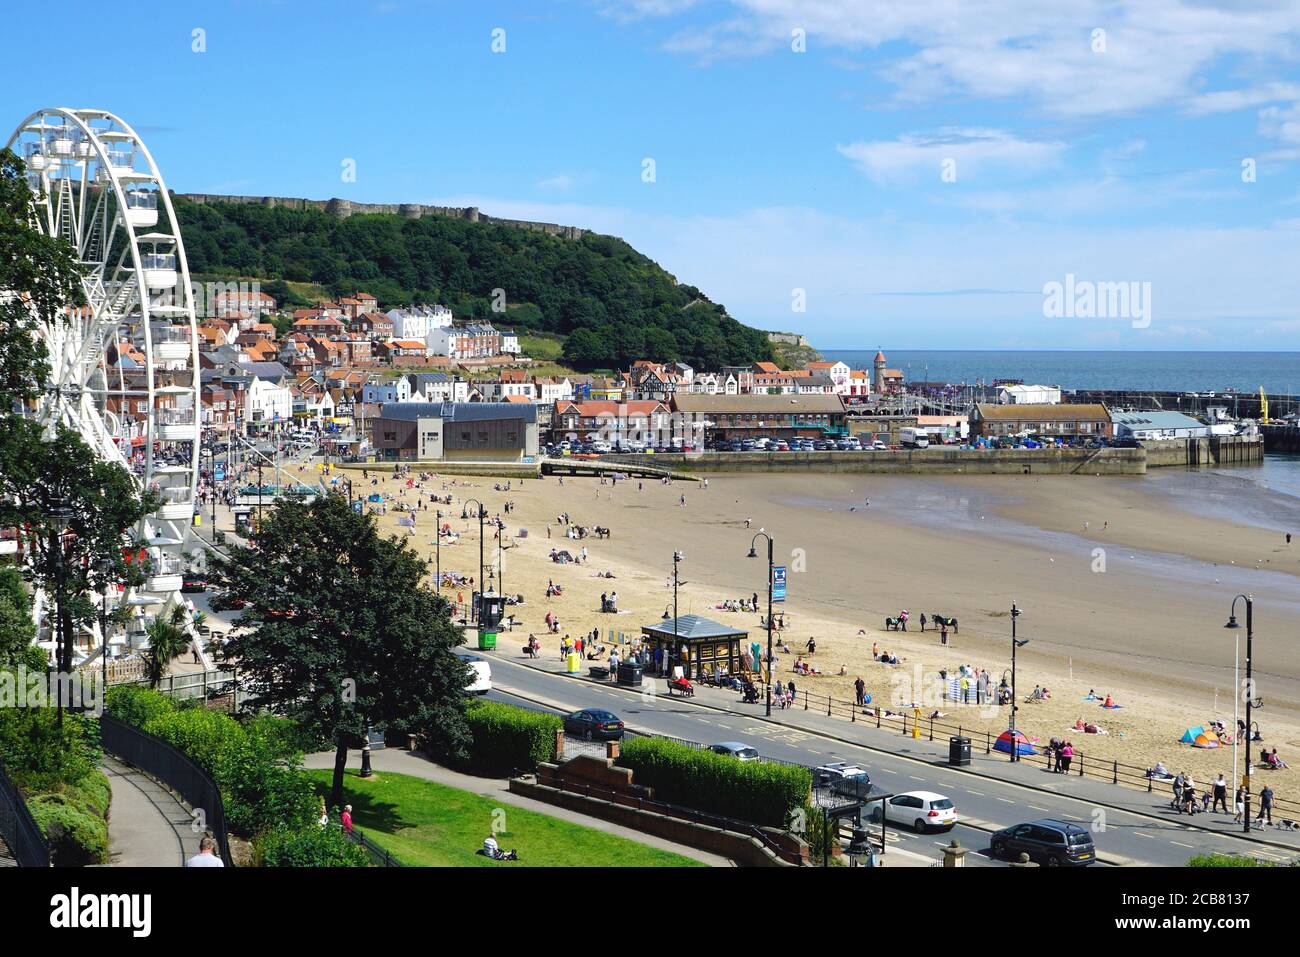 Scarborough, Yorkshire, UK. August 03, 2020. Tourists and holidaymakers enjoying the South beach at low tide after lockdown at Scarborough in Yorkshir Stock Photo